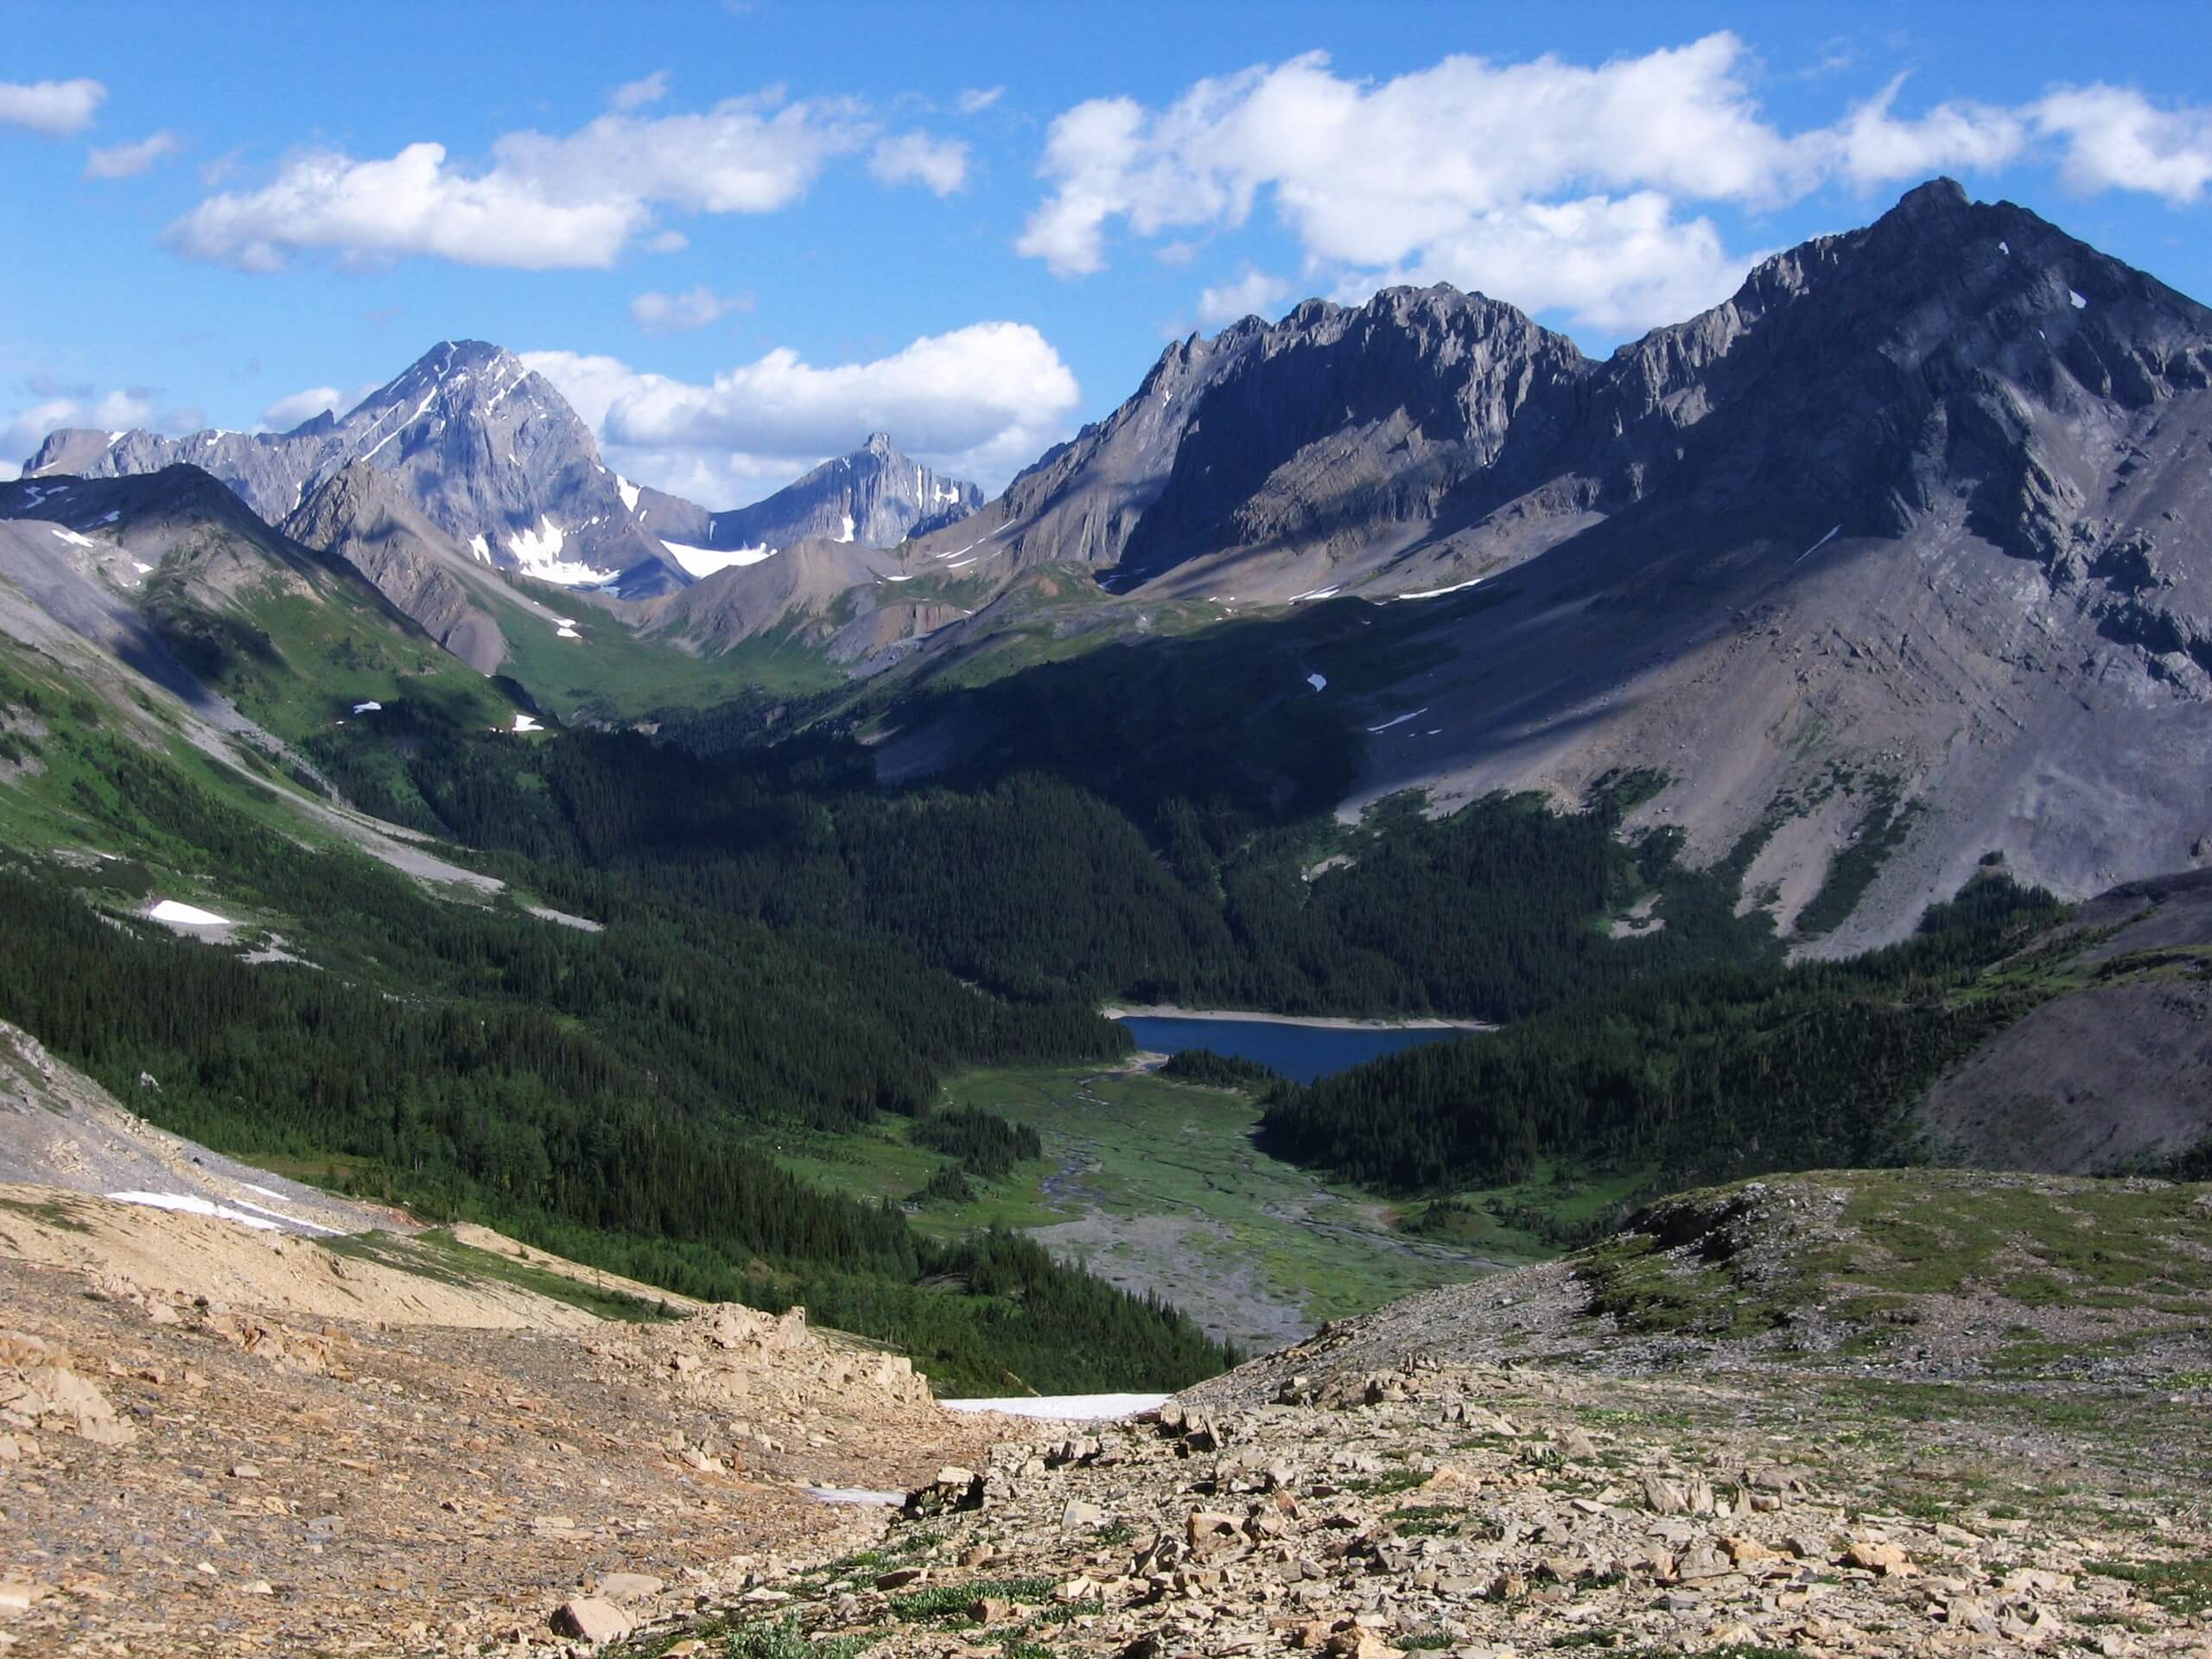 Looking down on the valley in Kananaskis